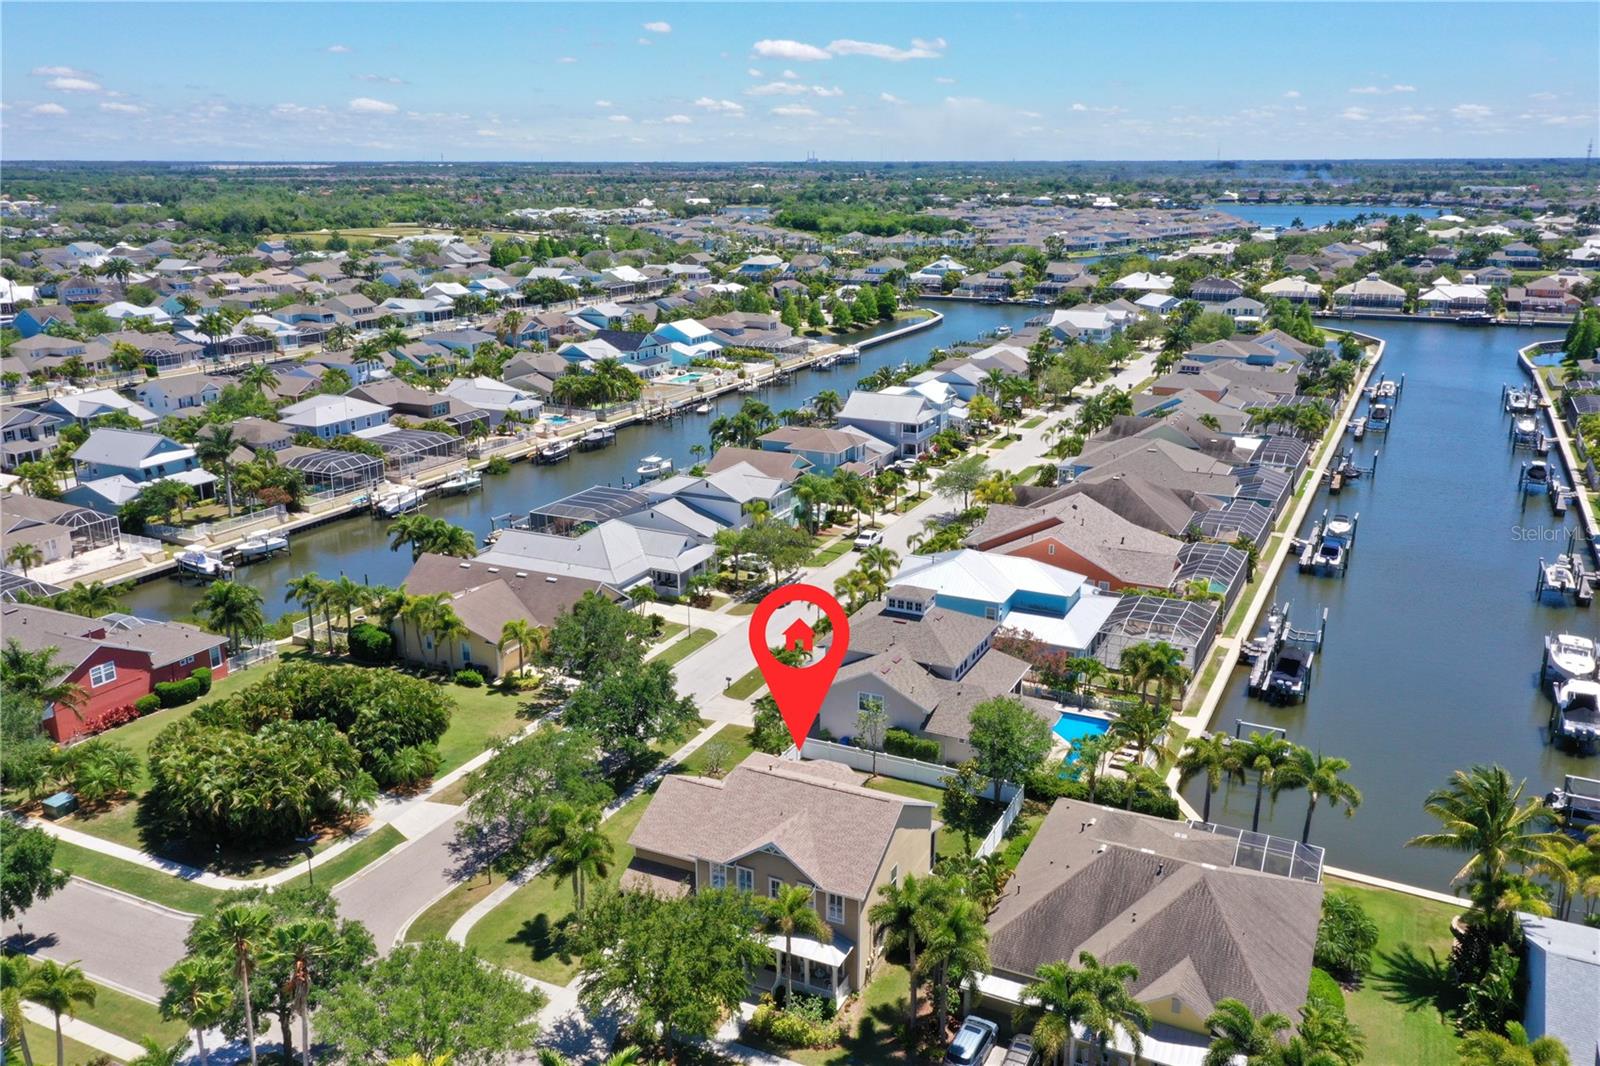 Marked Aerial View of 614 Islebay